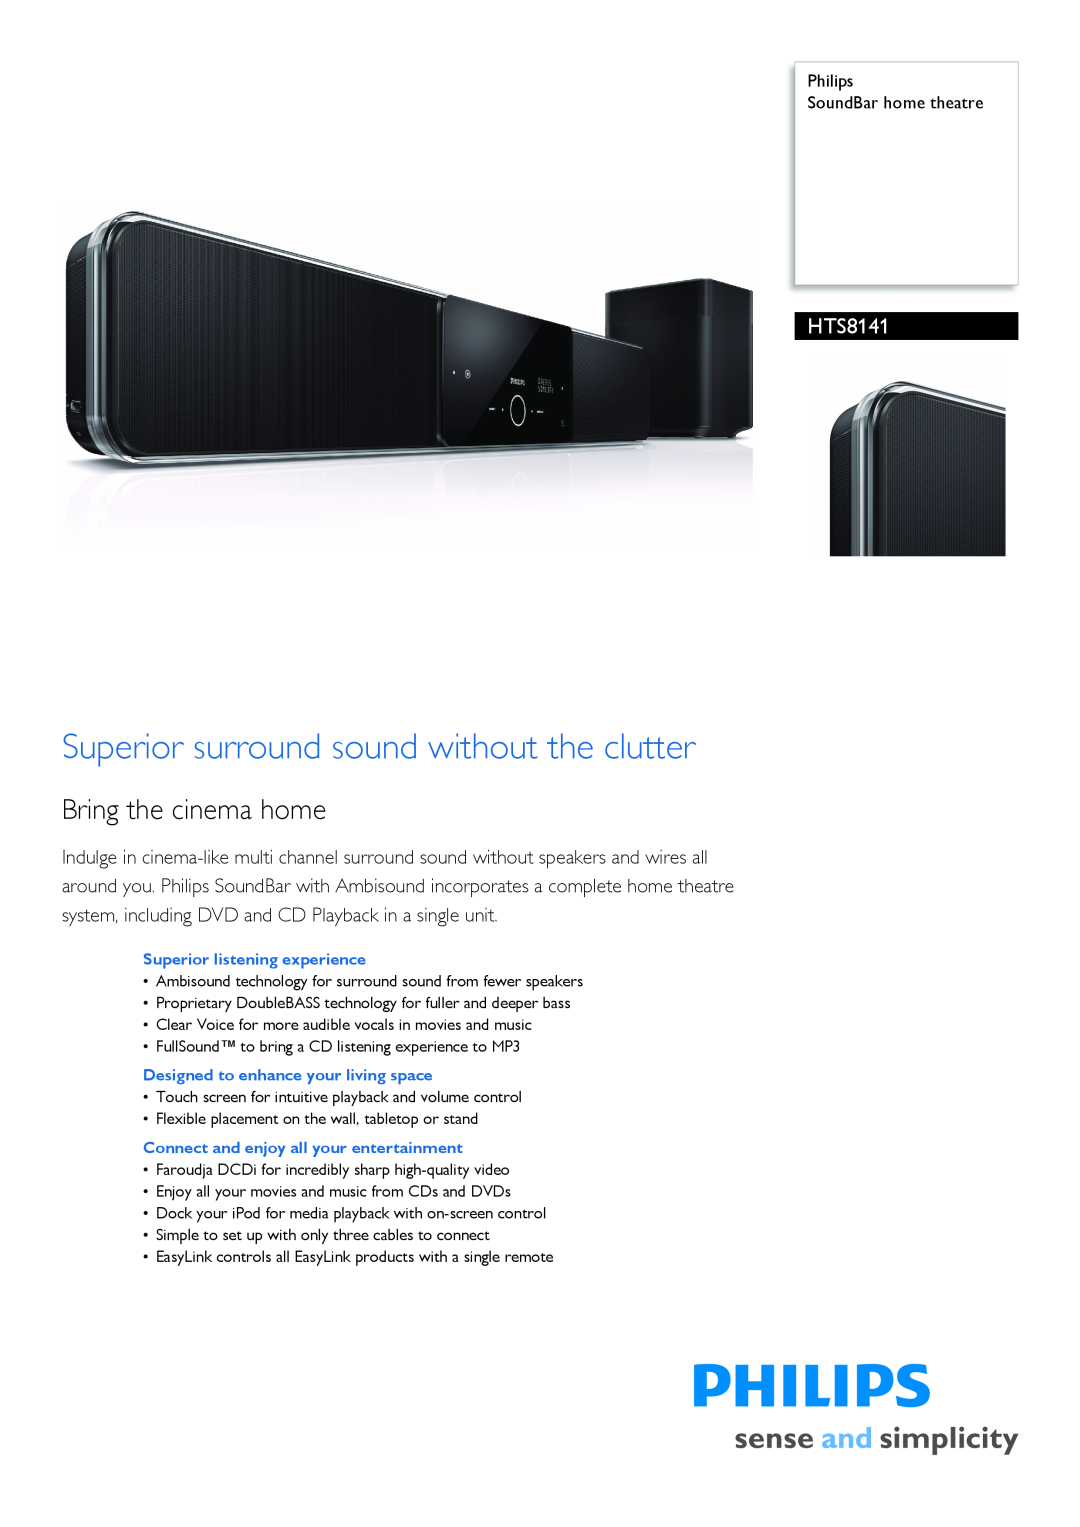 Philips HTS8141/98 manual Philips SoundBar home theatre, Superior surround sound without the clutter 